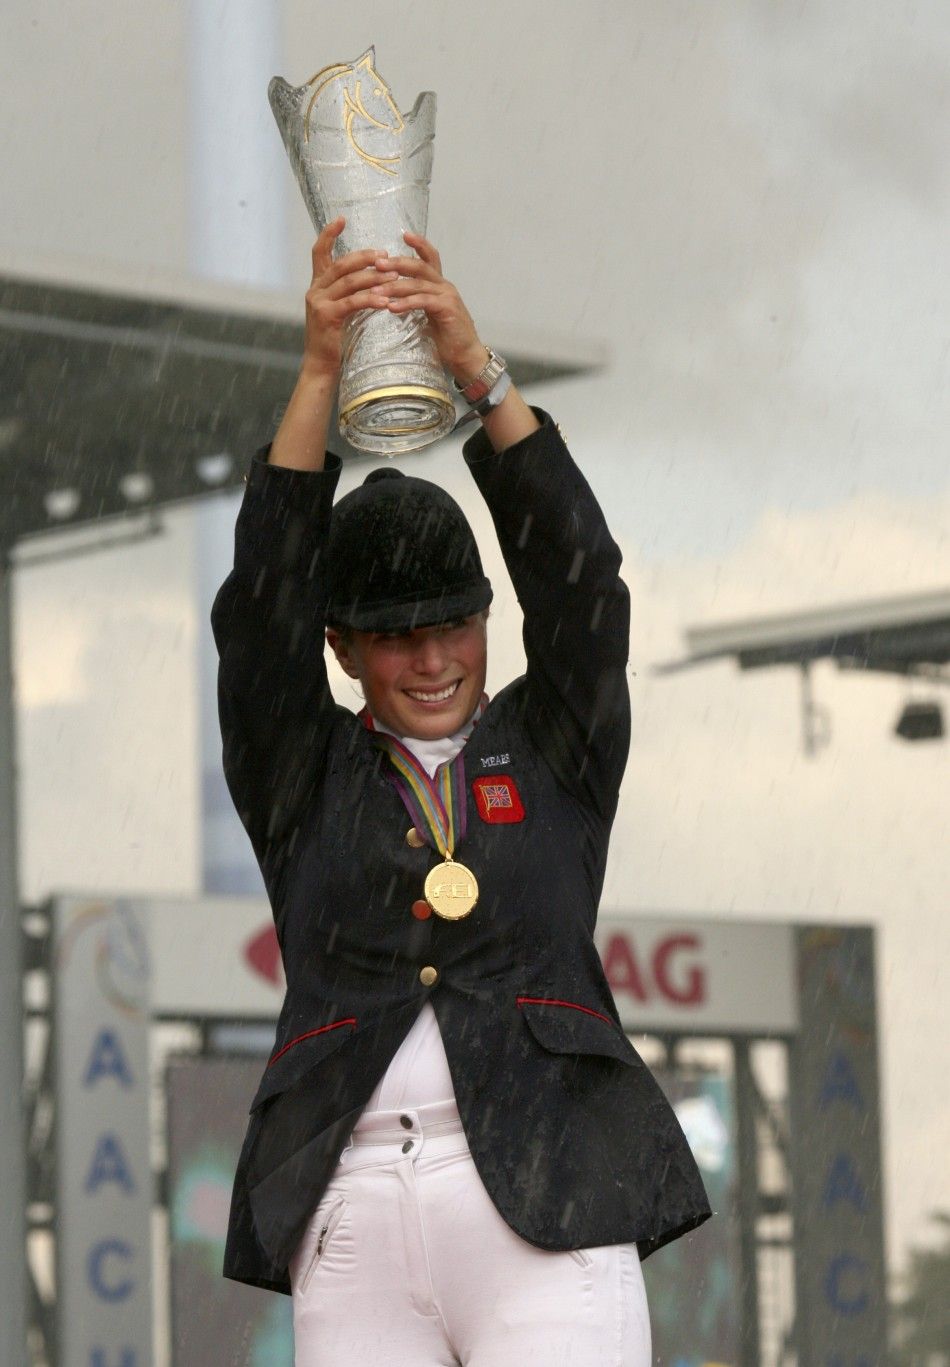 Eventing gold medal winner Britains Zara Phillips holds up the Sponsors cup at the World Equestrian Games in Aachen 